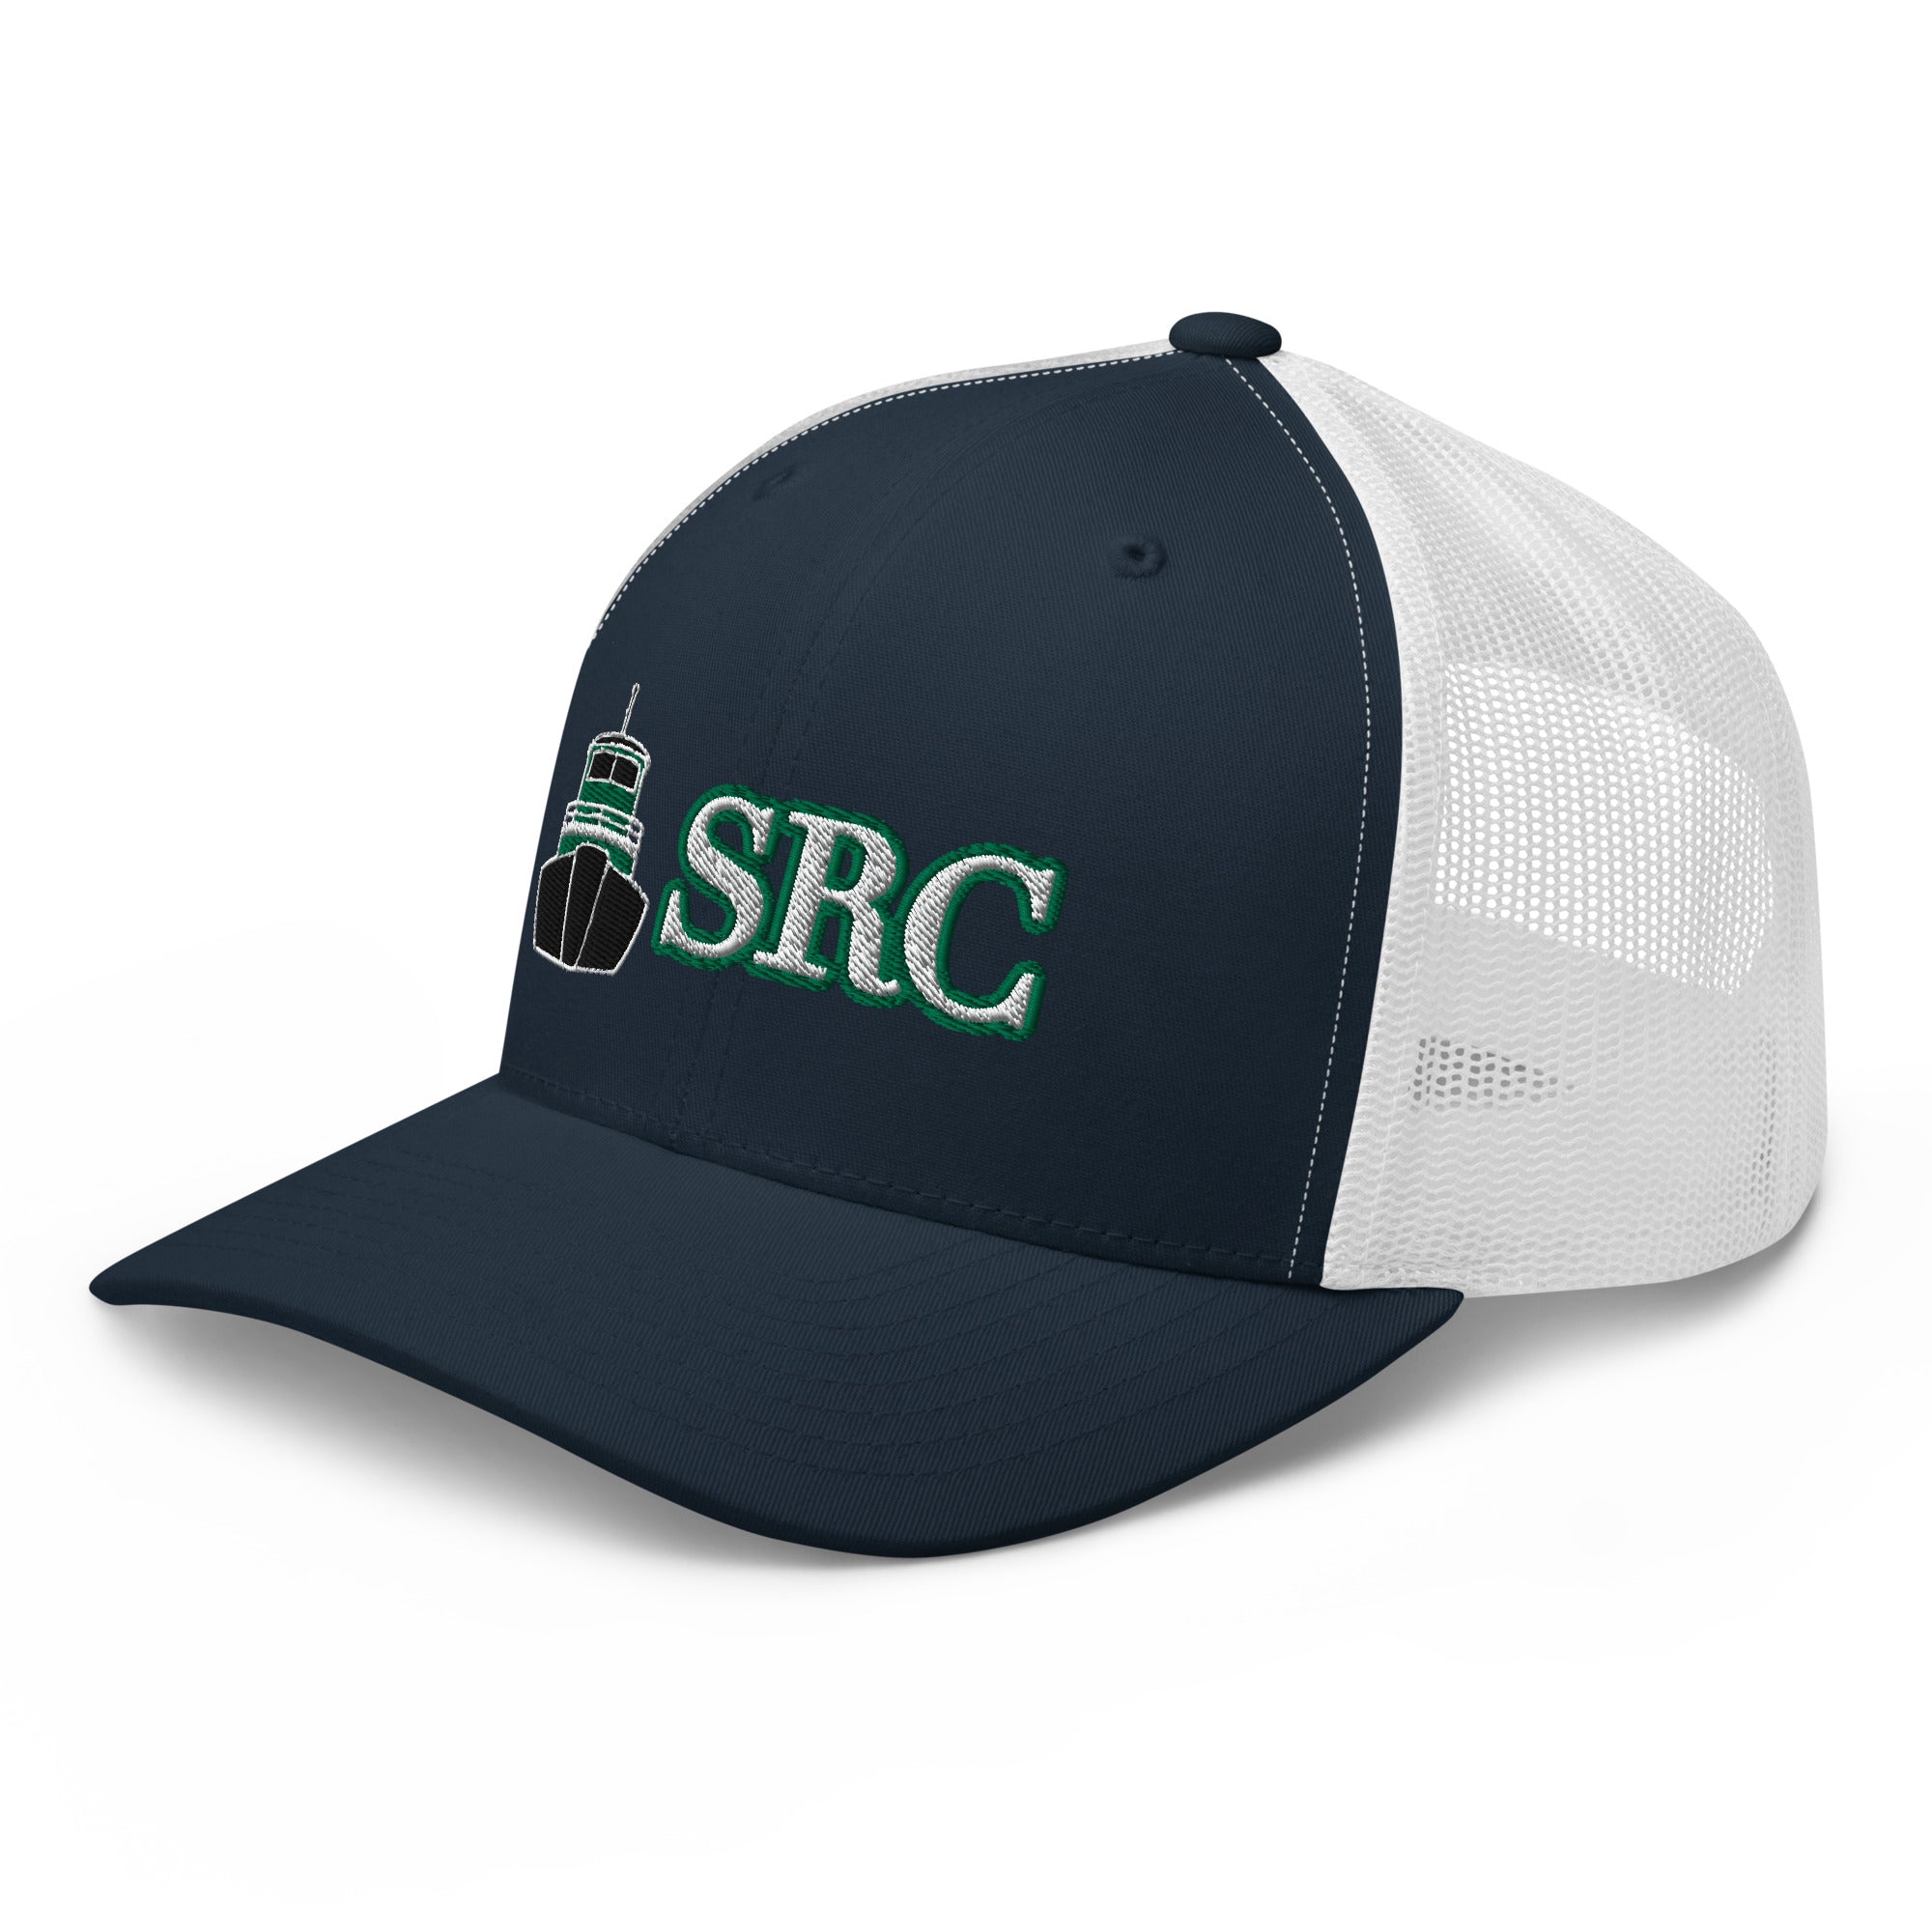 Rugby Imports Seacoast WR Trucker Cap